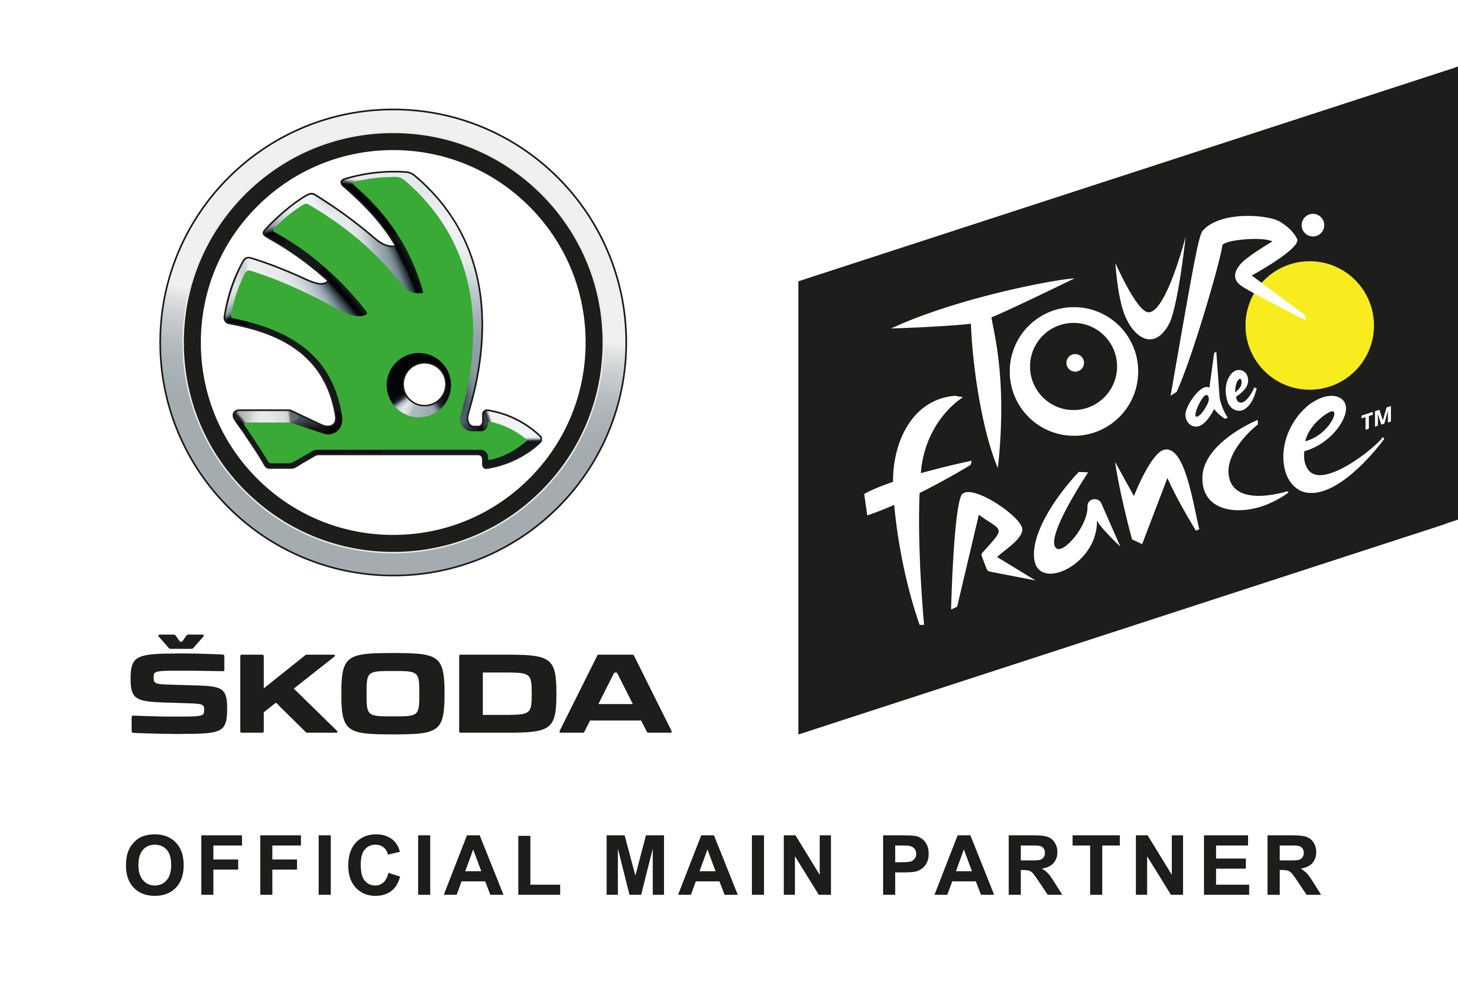 Current logo of the Tour de France. The largest cycling race in the world takes place this year from 6 to 28 July.